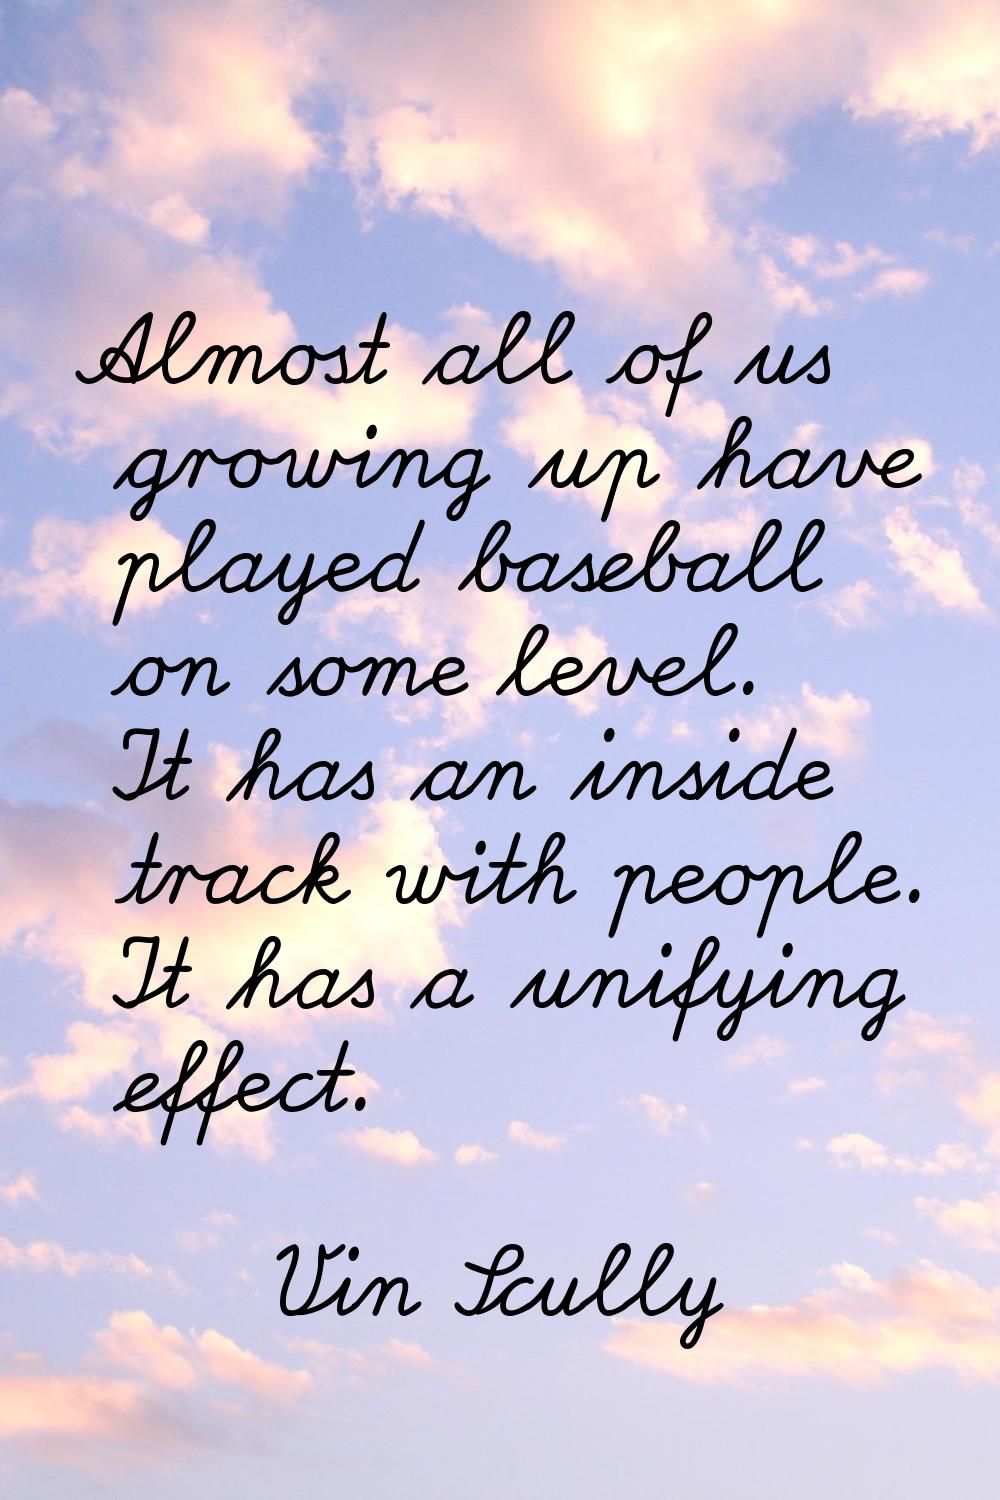 Almost all of us growing up have played baseball on some level. It has an inside track with people.